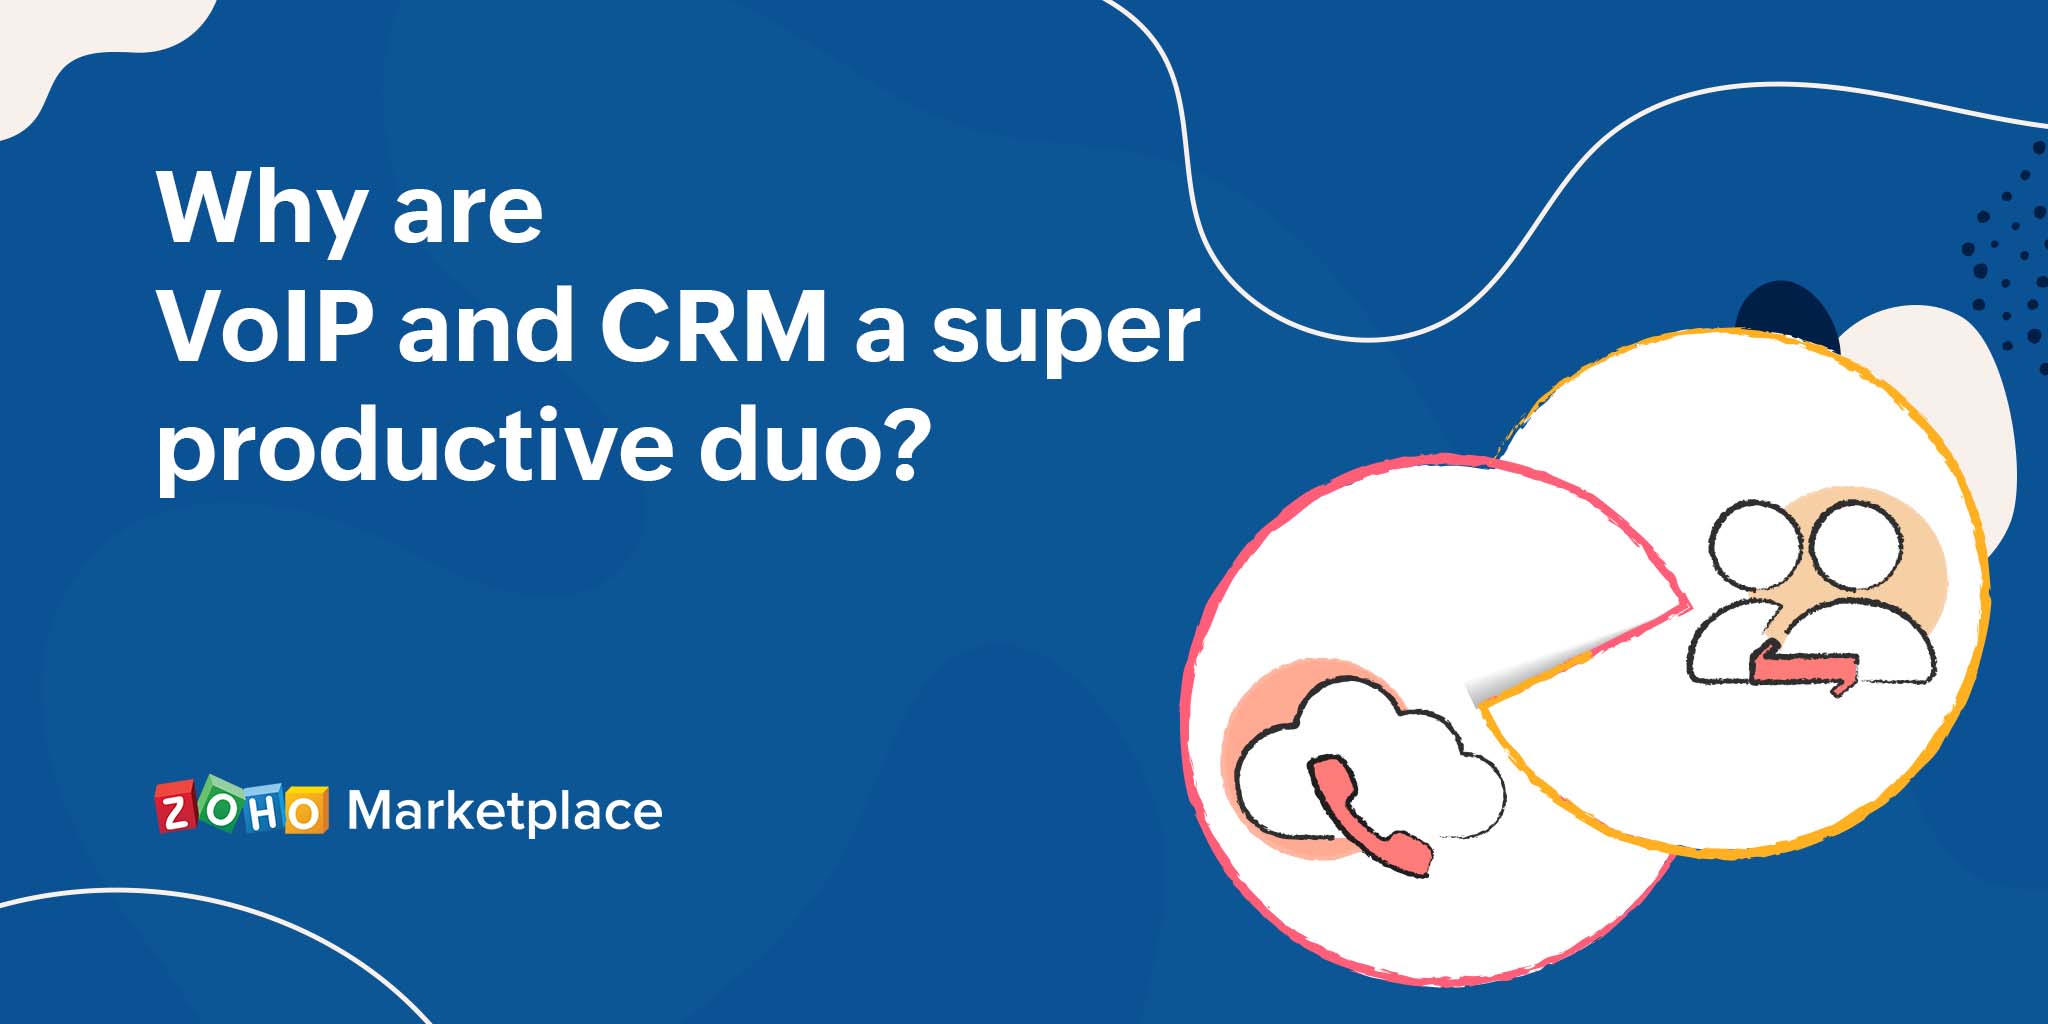 Why are VoIP and CRM a super productive duo?